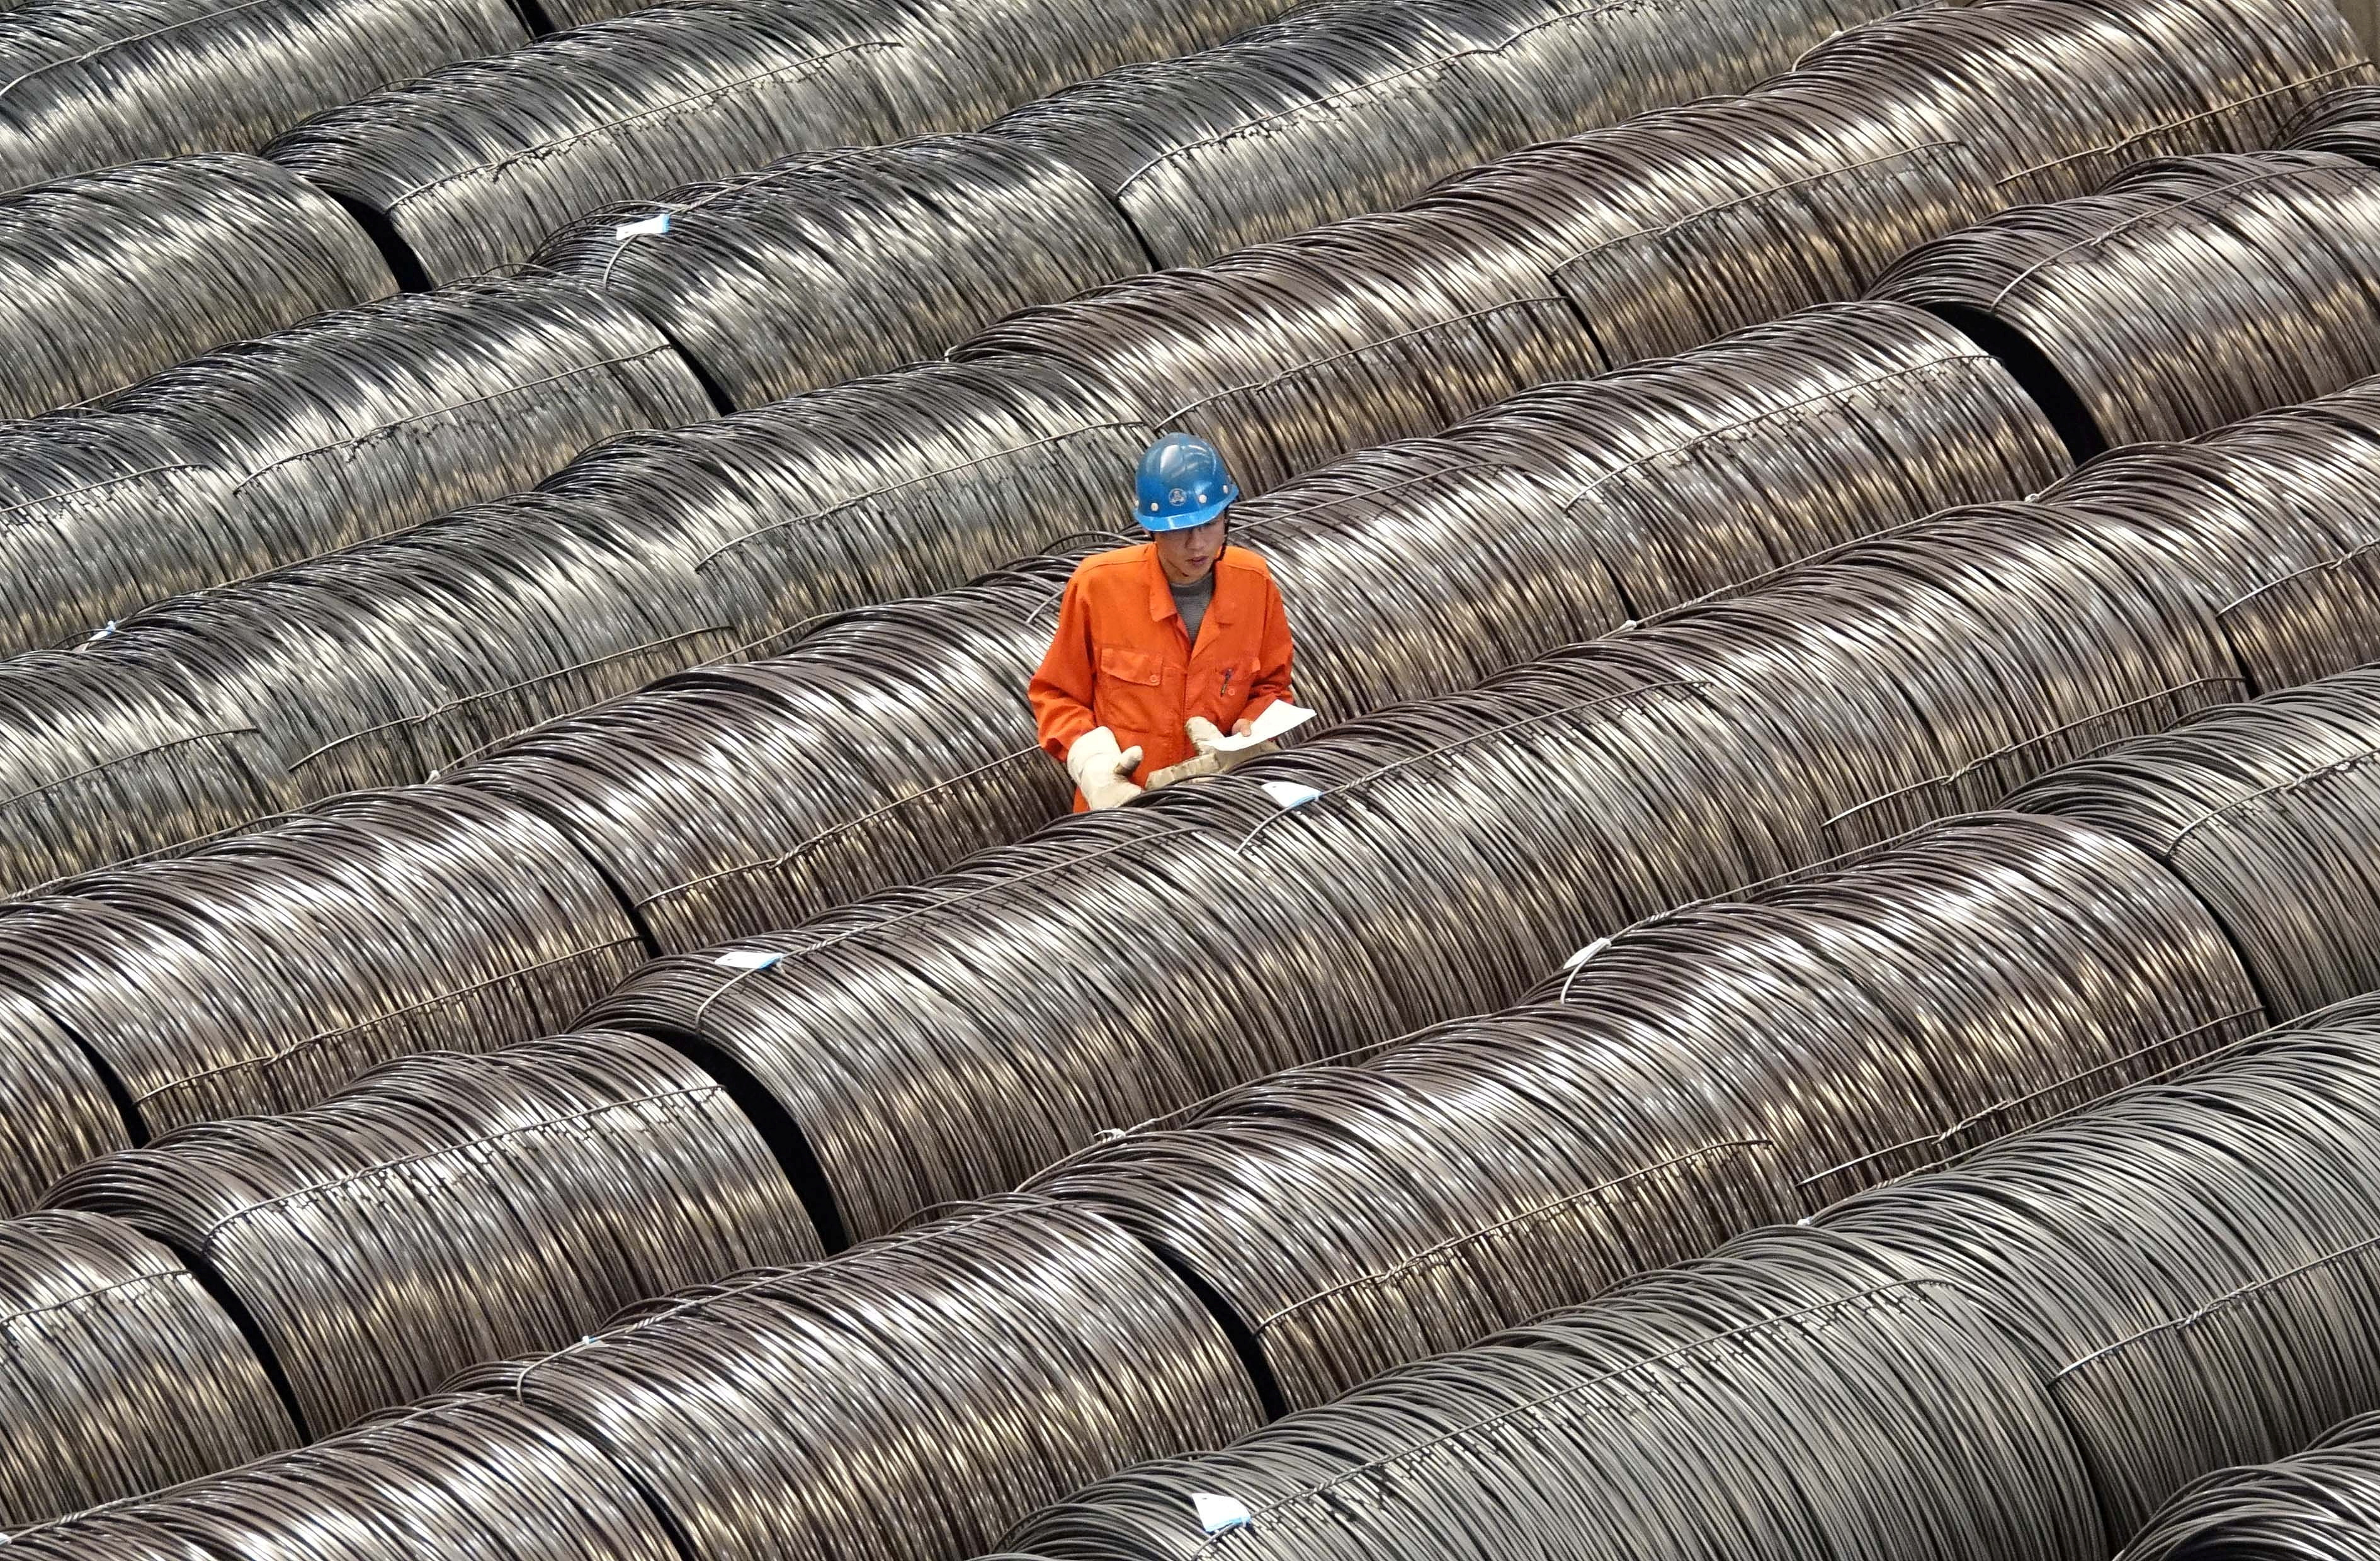 A worker checks steel wires at a warehouse in Dalian, Liaoning province